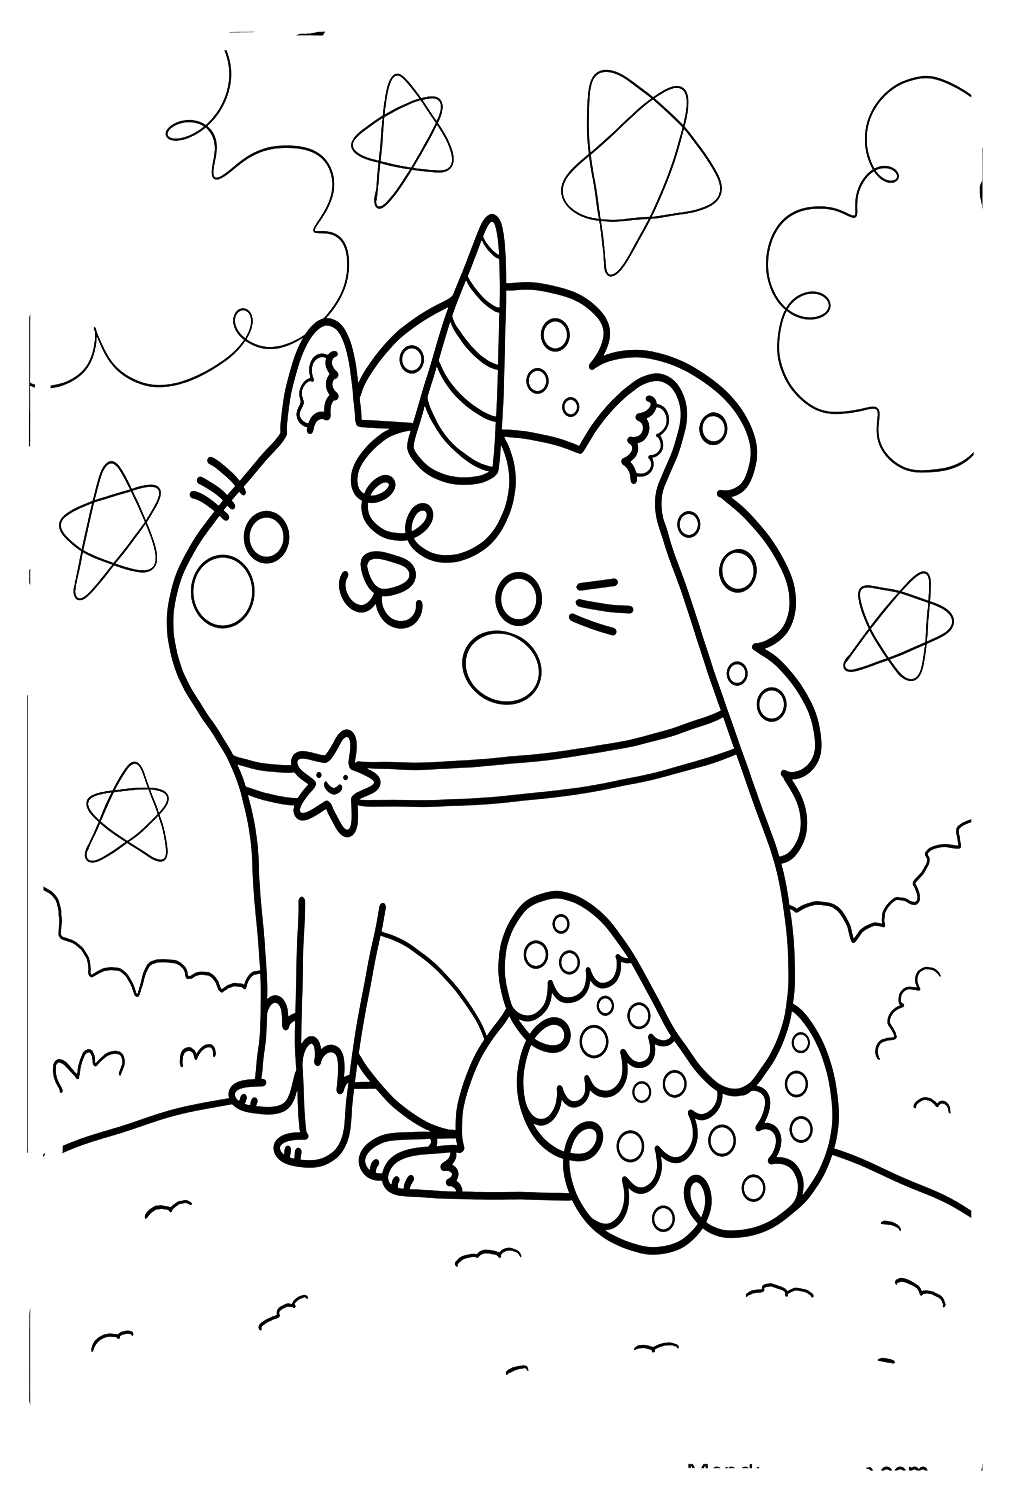 Cat Unicorn Coloring Page from Unicorn